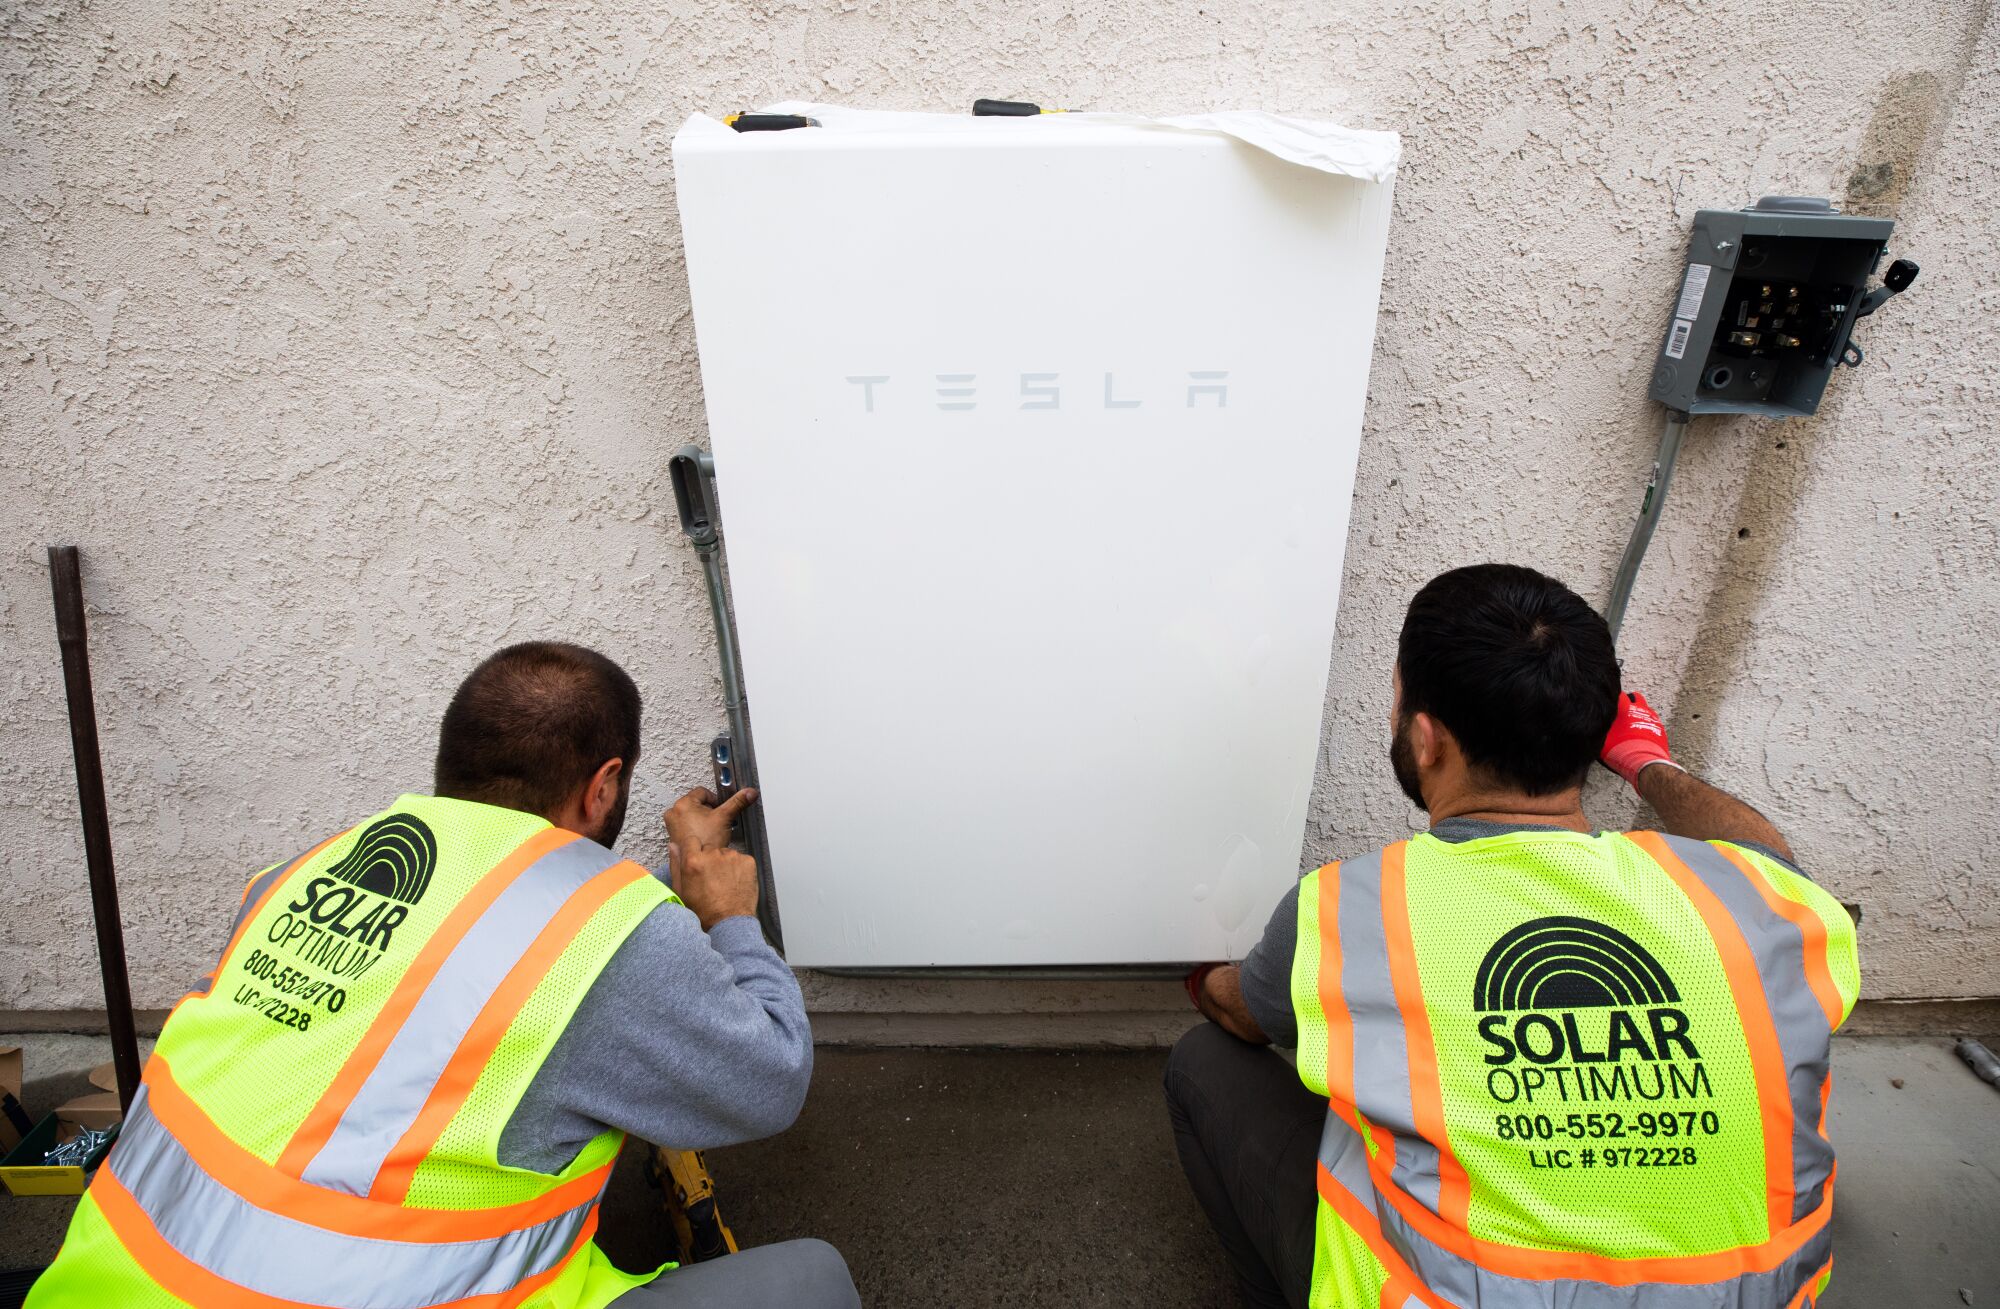 Solar Optimum installers set up a Tesla Powerwall battery system during a solar panels installation at a house in Brea.